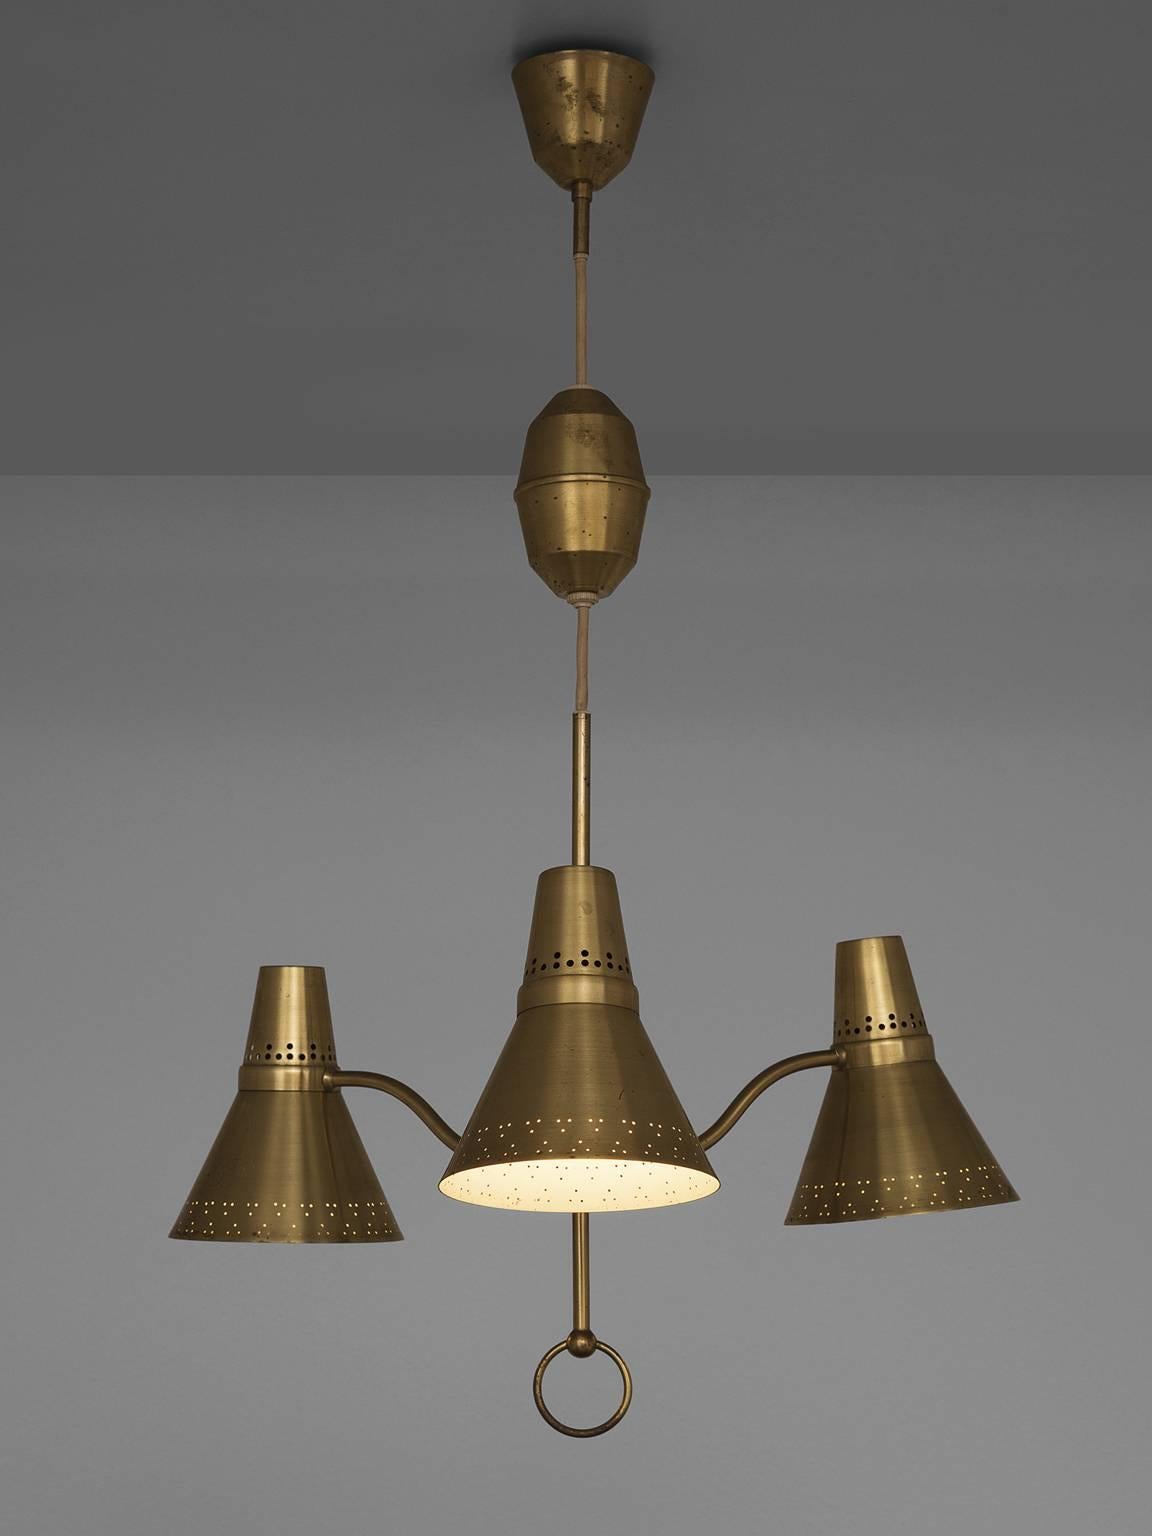 Pair of height adjustable ceiling lamp, brass, produced by AB E.Hansson & Co in Malmö, Sweden, 1950s. 

This playful lamp holds the middle between Classic, decorative chandeliers and organic, simplistic Scandinavian design. The lamp is executed